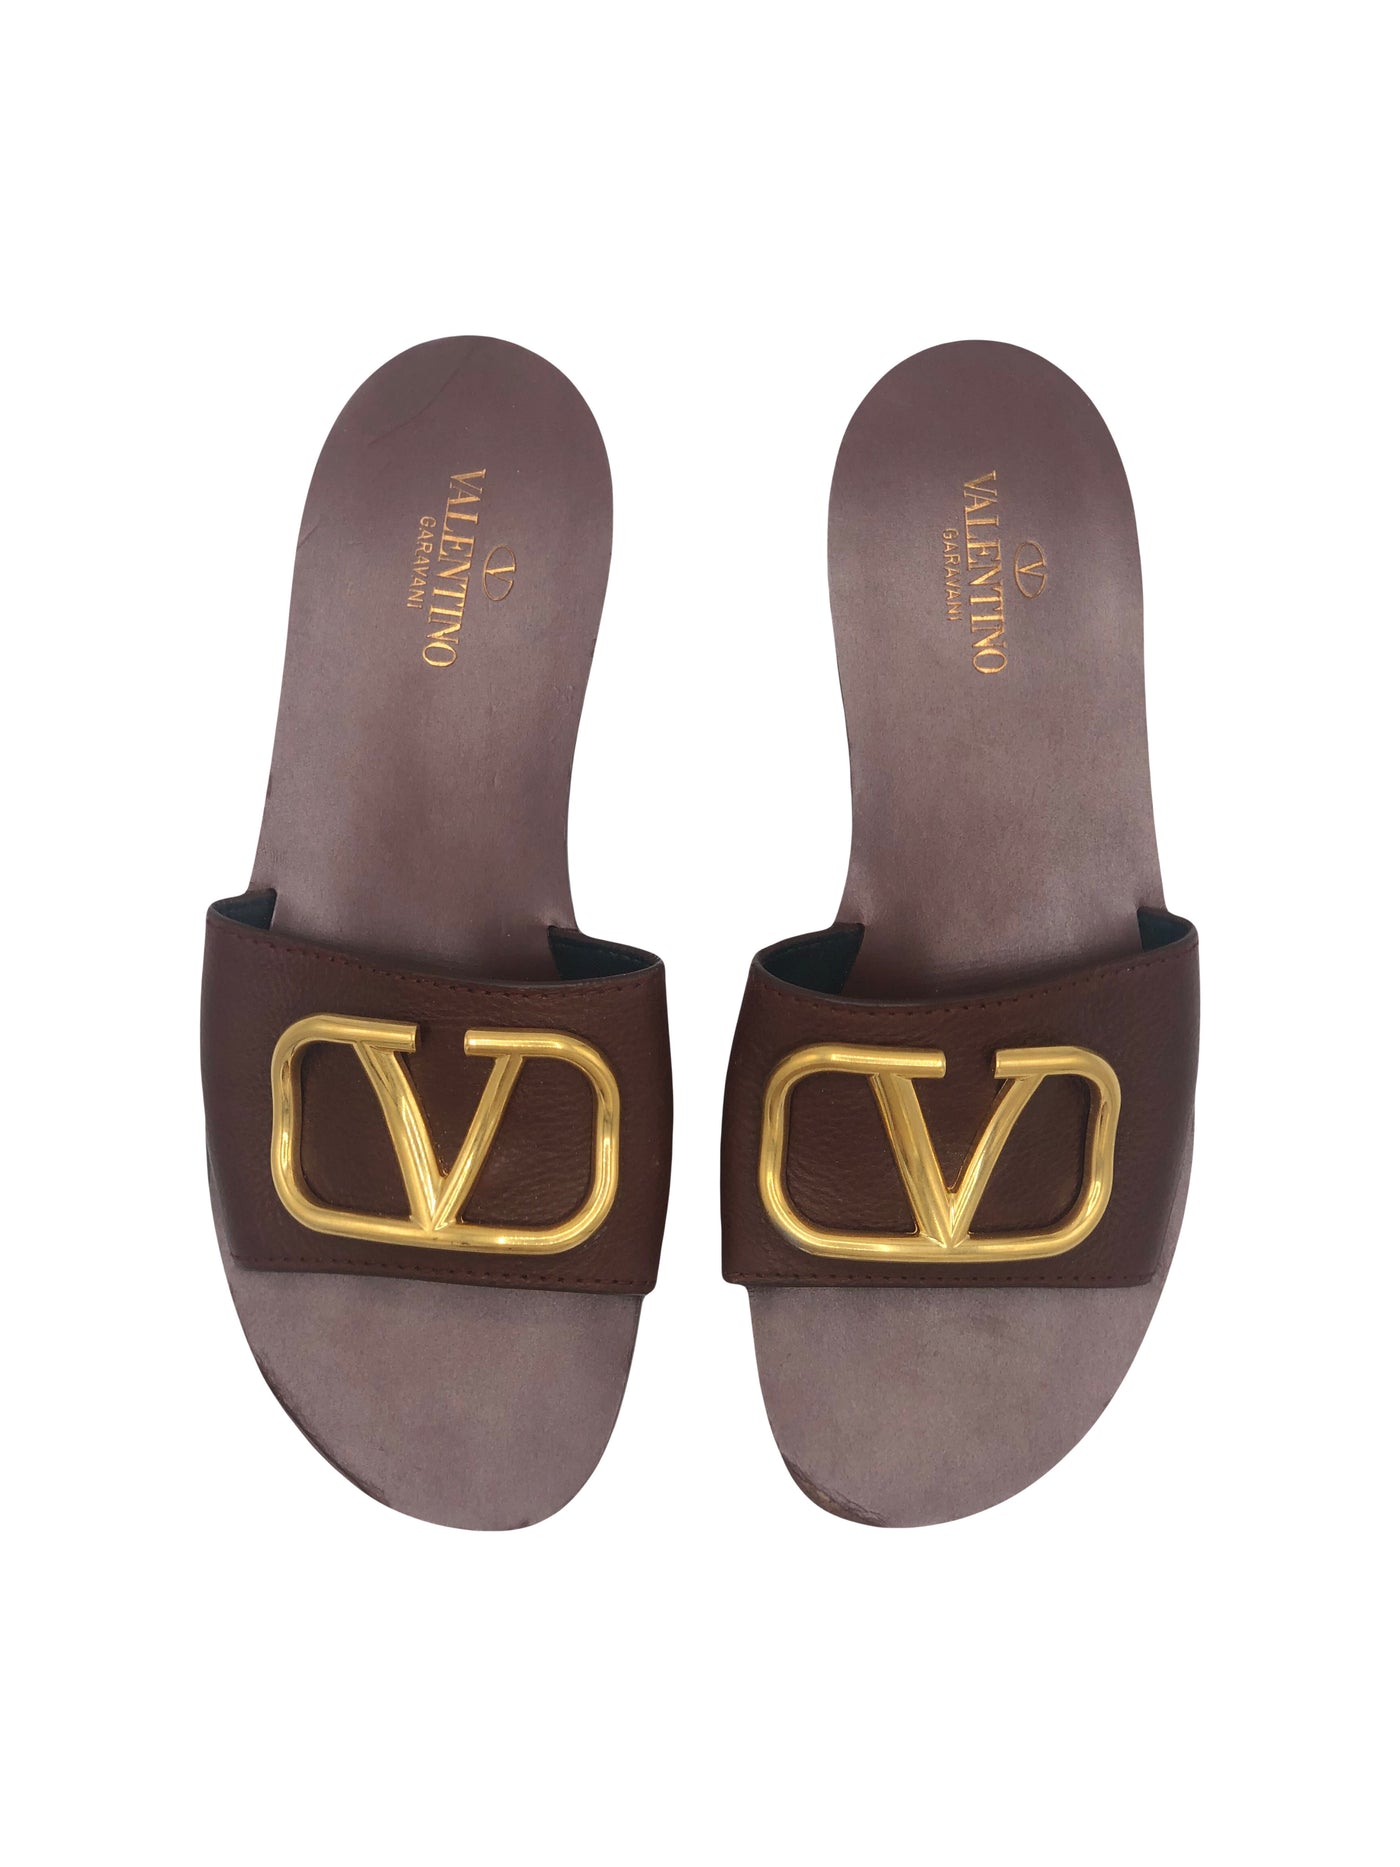 VALENTINO Brown leather flats with gold “V” size 37.5